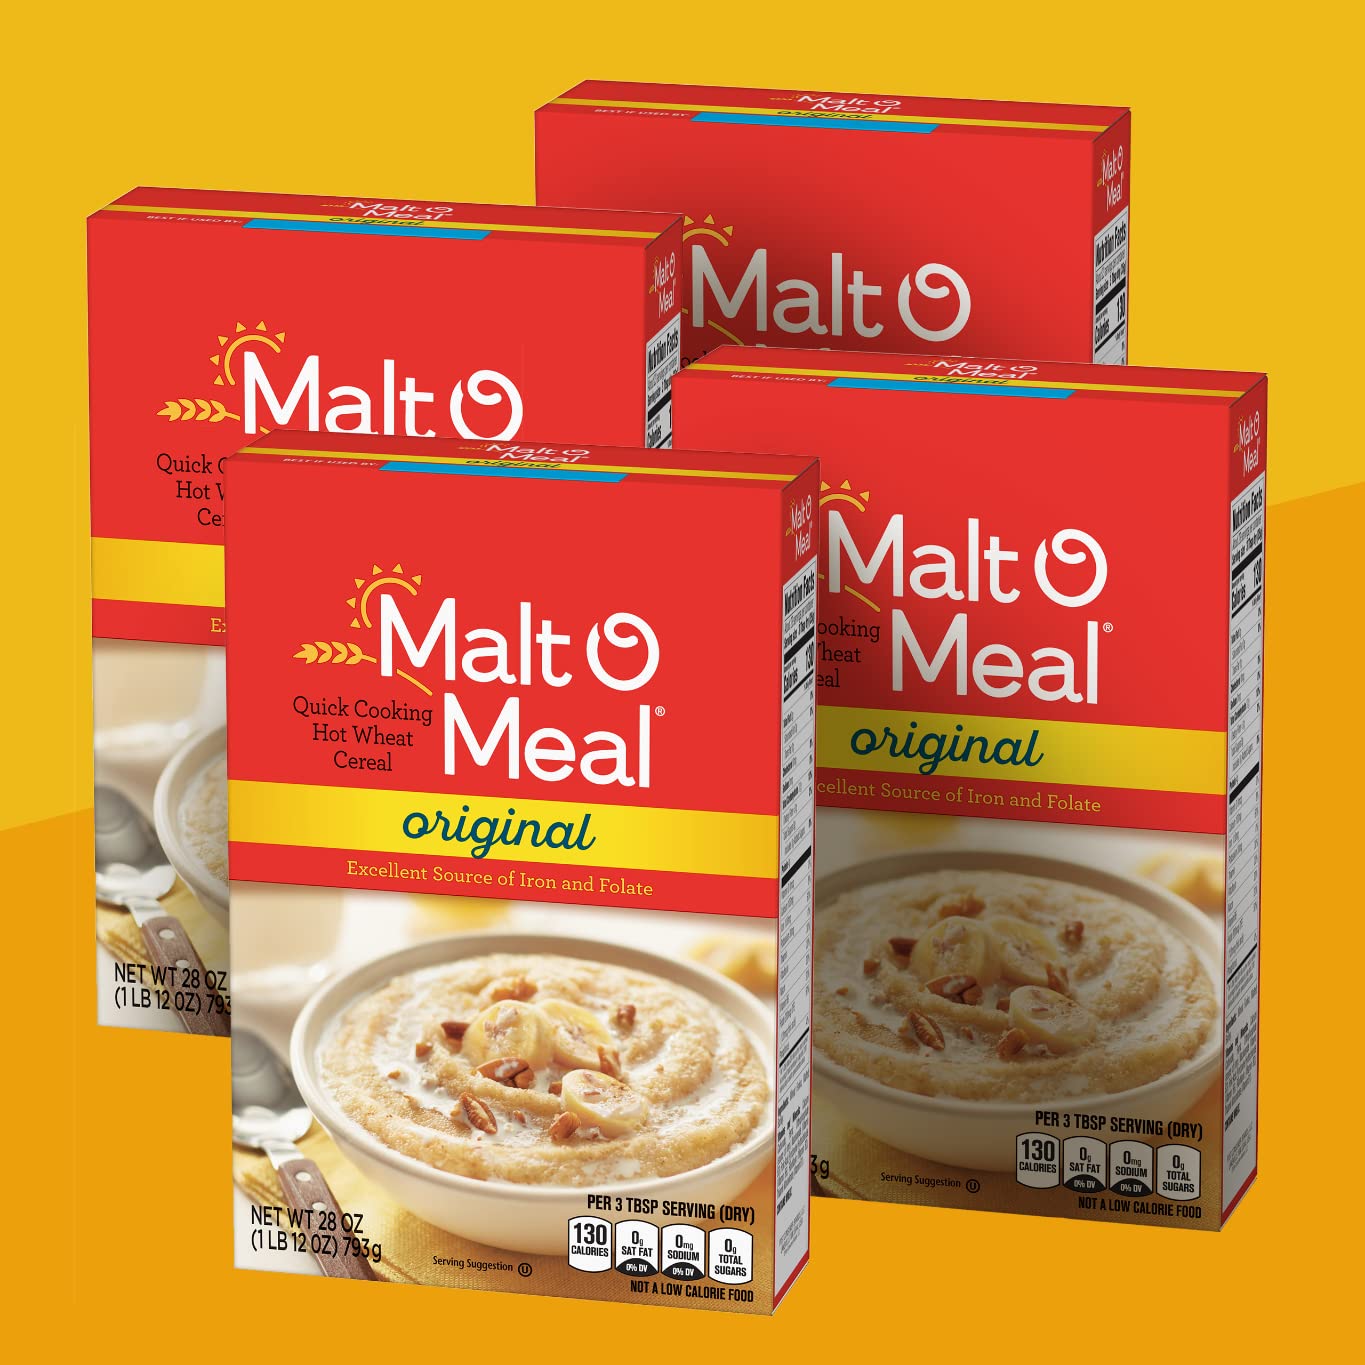 Malt-O-Meal, Original Malt-O-Meal Hot Breakfast Cereal, Quick Cooking, 28 Ounce Box (Pack of 4) : Grocery & Gourmet Food